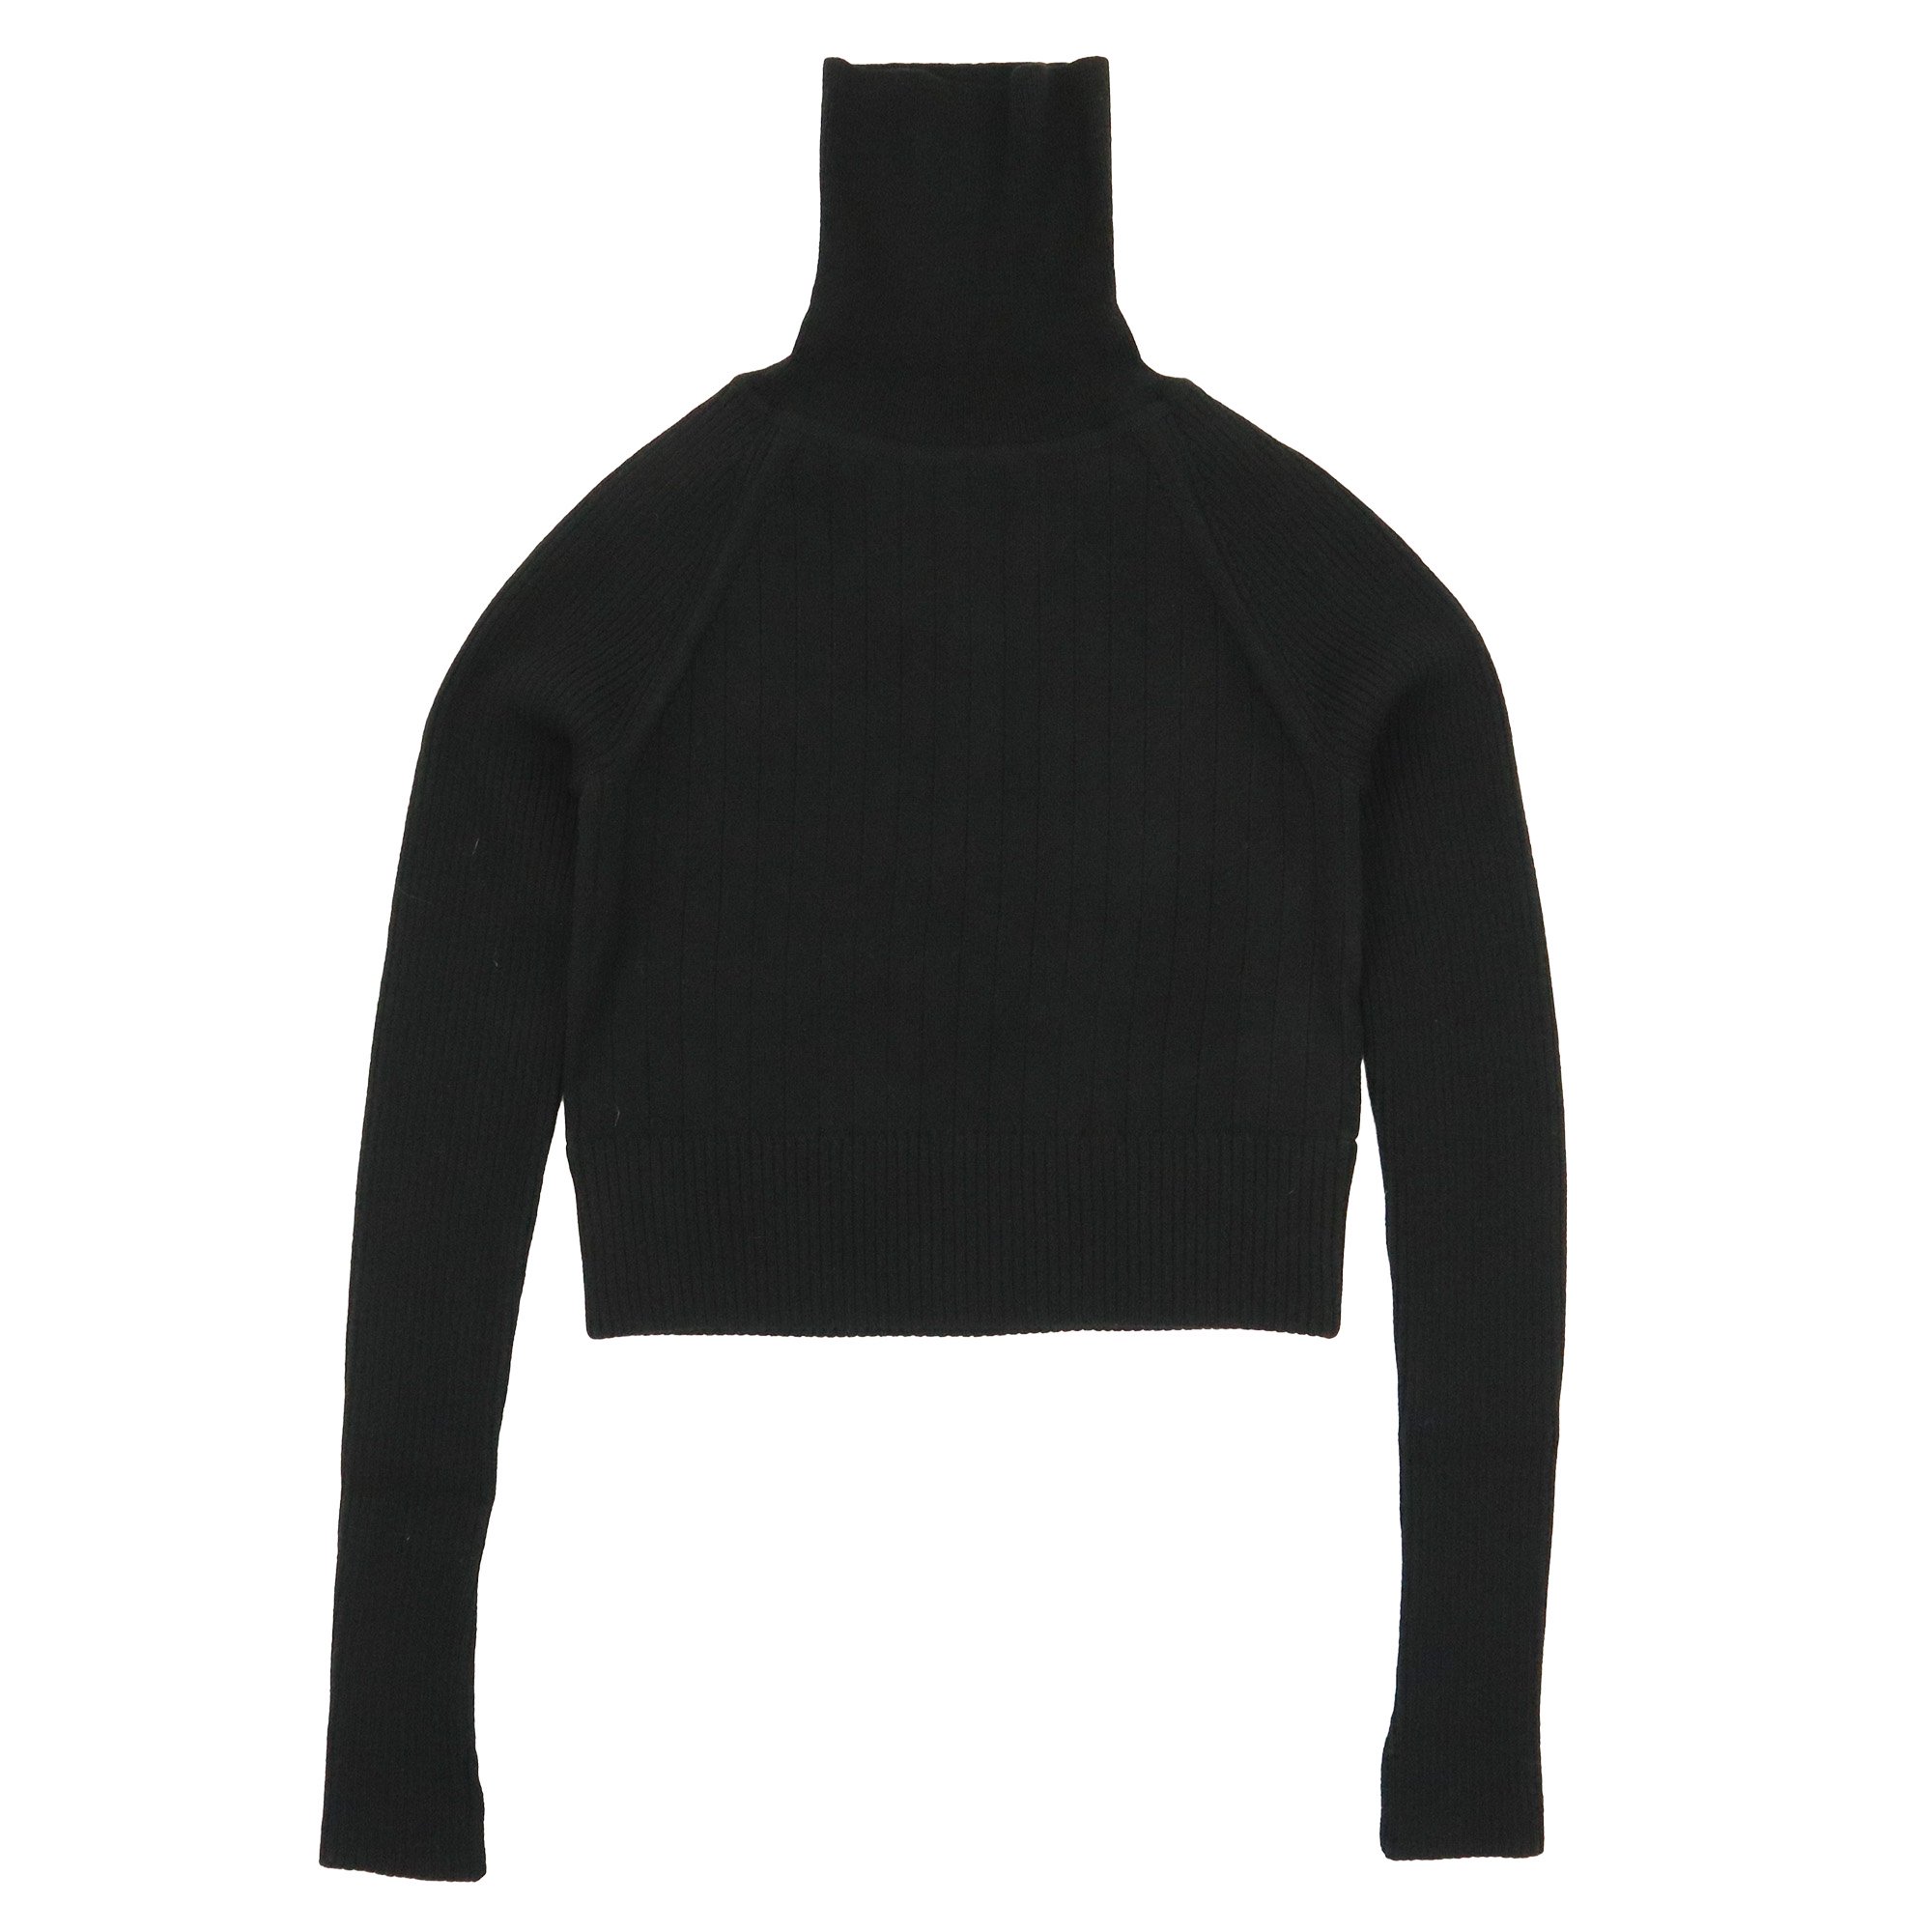 <img class='new_mark_img1' src='https://img.shop-pro.jp/img/new/icons47.gif' style='border:none;display:inline;margin:0px;padding:0px;width:auto;' />THE RERACS BULKY WOOL/CASHMERE RAGLAN TURTLE NECK SHORT PULLOVER KNITBLACK